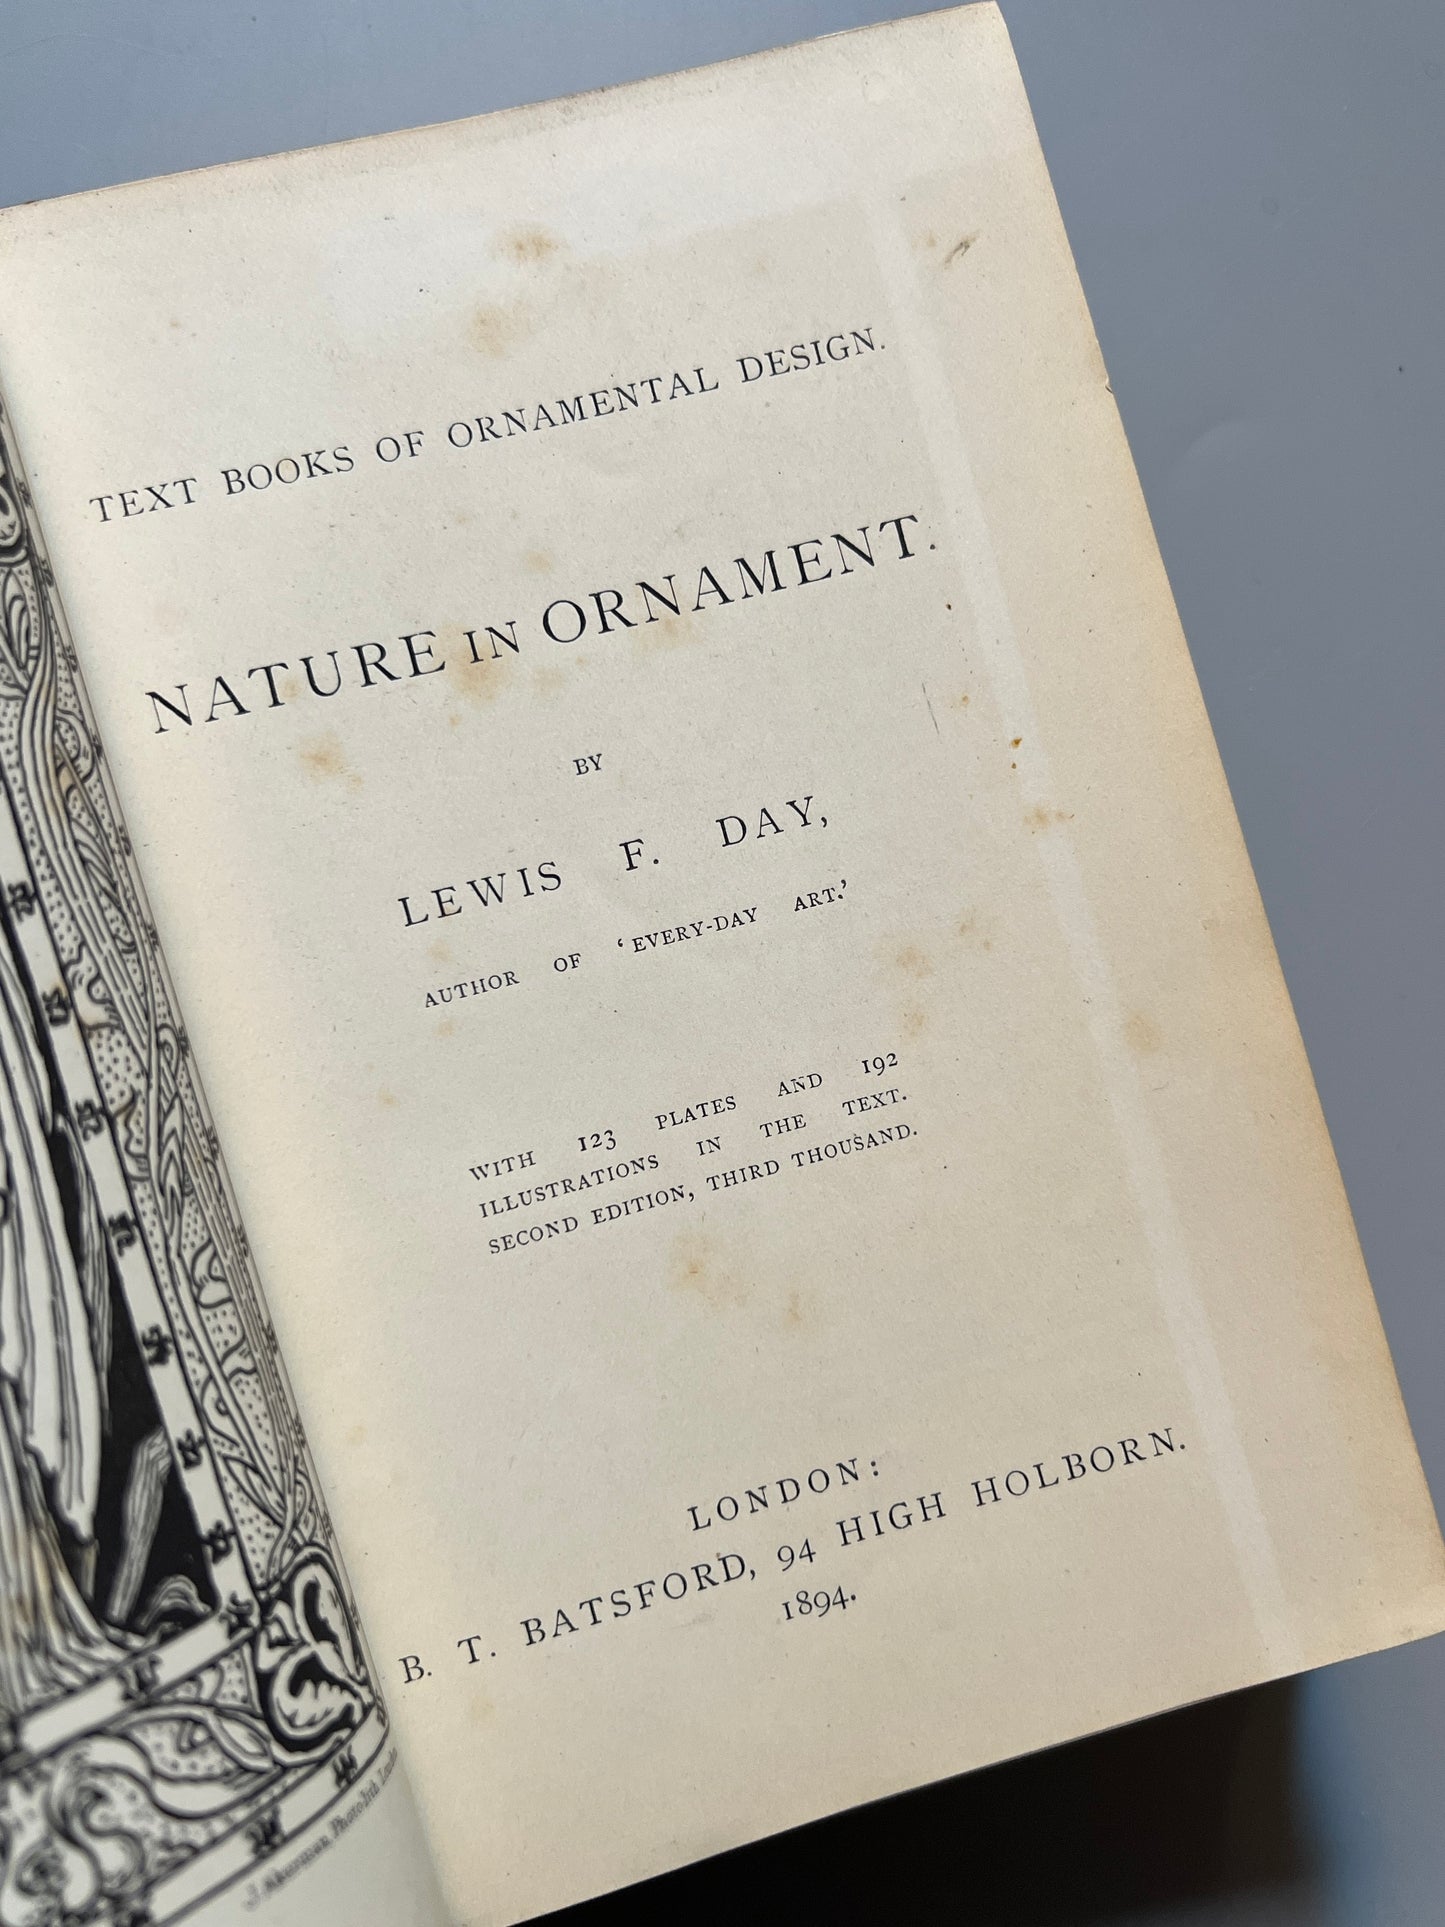 Nature in ornament, Lewis F. Day - B. T. Batsford, 1894